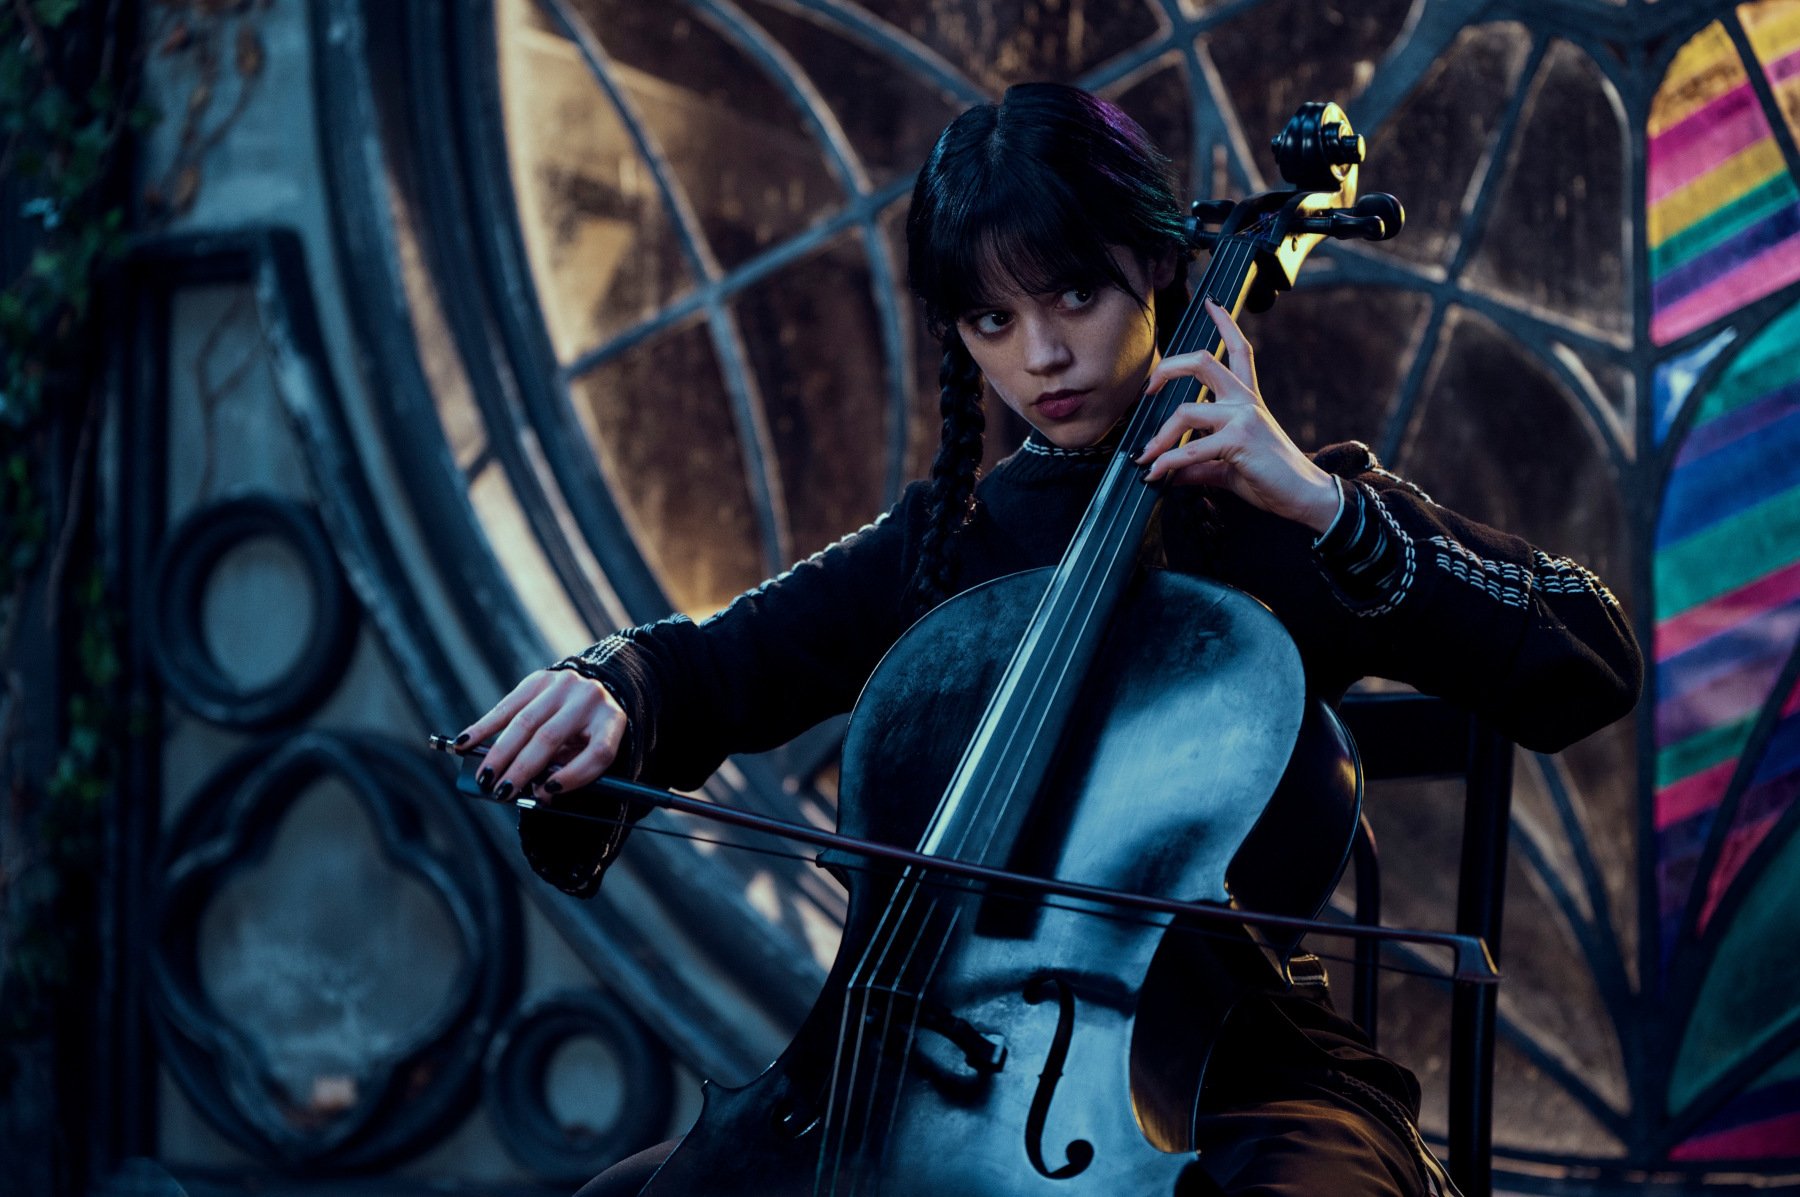 Jenna Ortega in 'Wednesday' for our list of new shows and movies coming out on Netflix this week. Her black hair is in braided pigtails, and she's playing the violin.